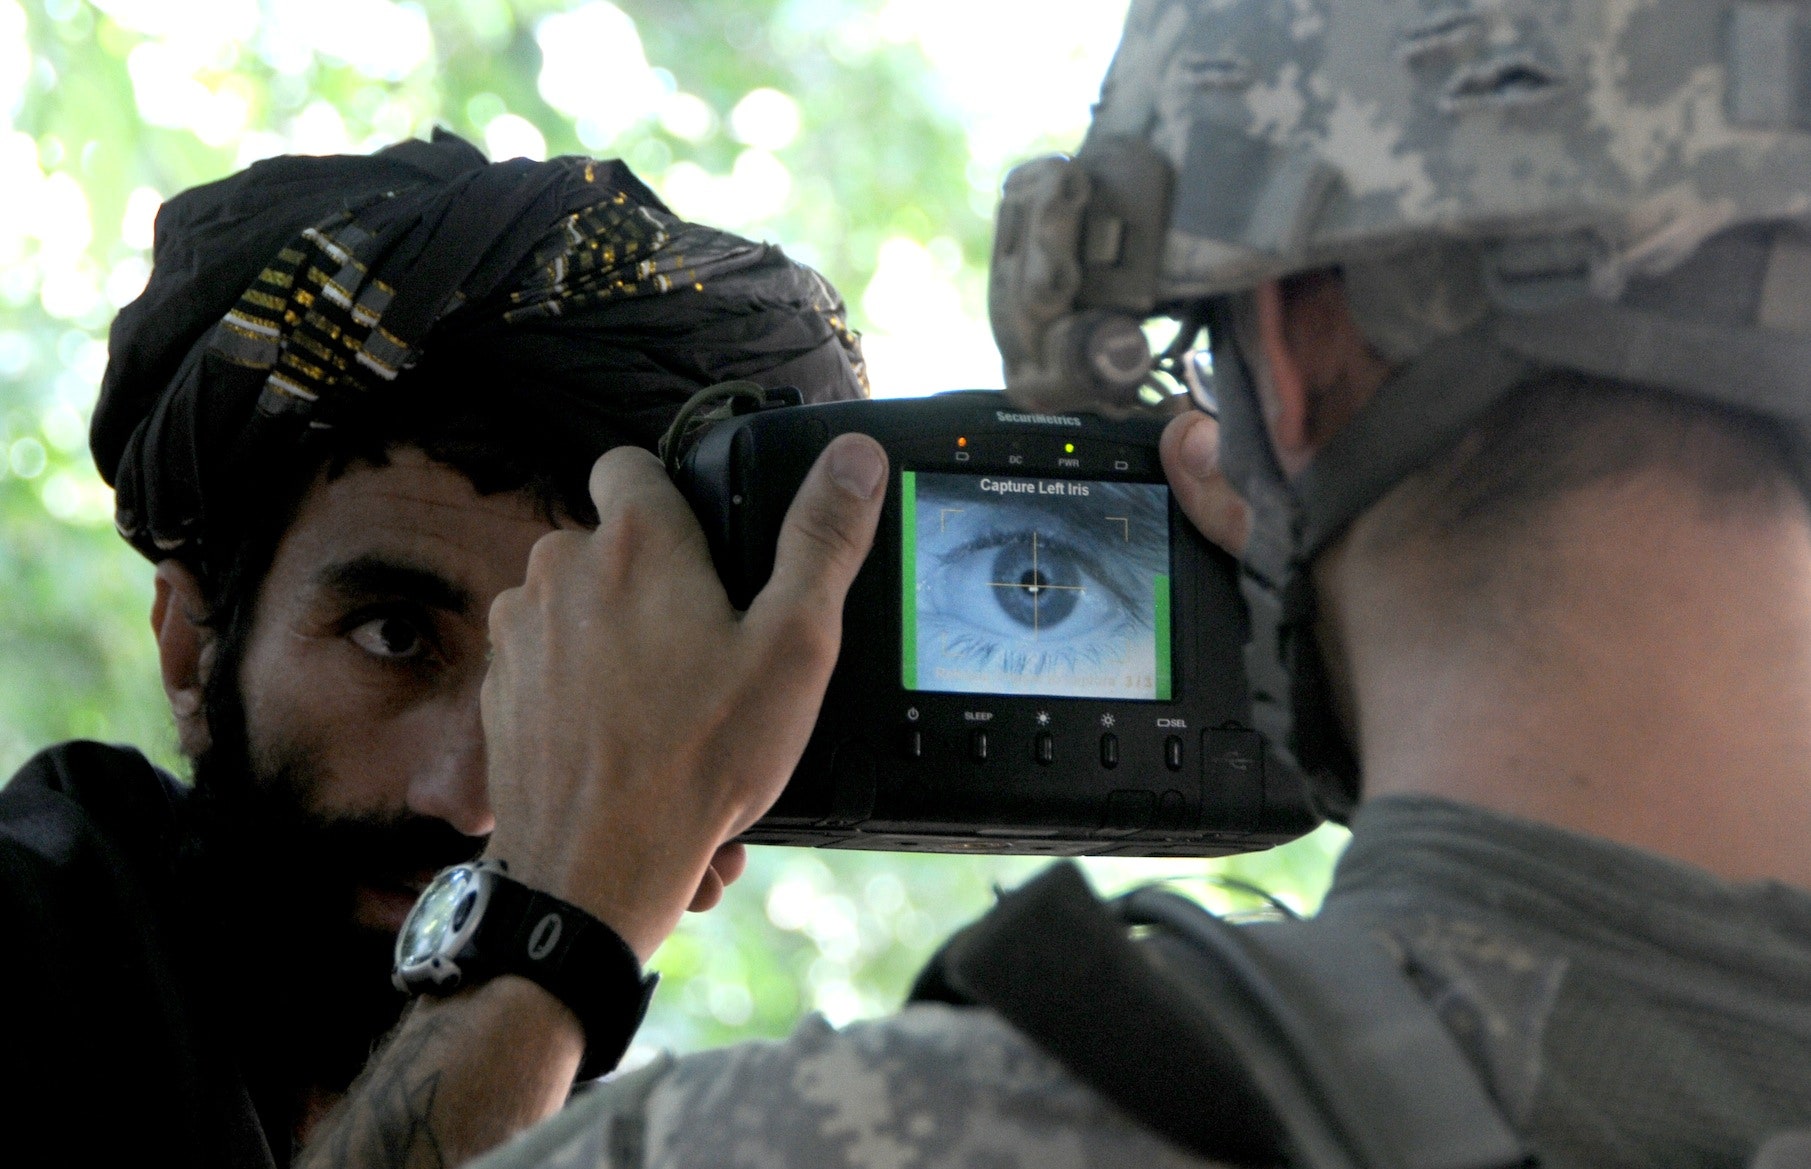 A U.S. soldier in army uniform and helmet is shown from behind while taking a close-up photo of the eye of an Afghan man with a bear and turban.